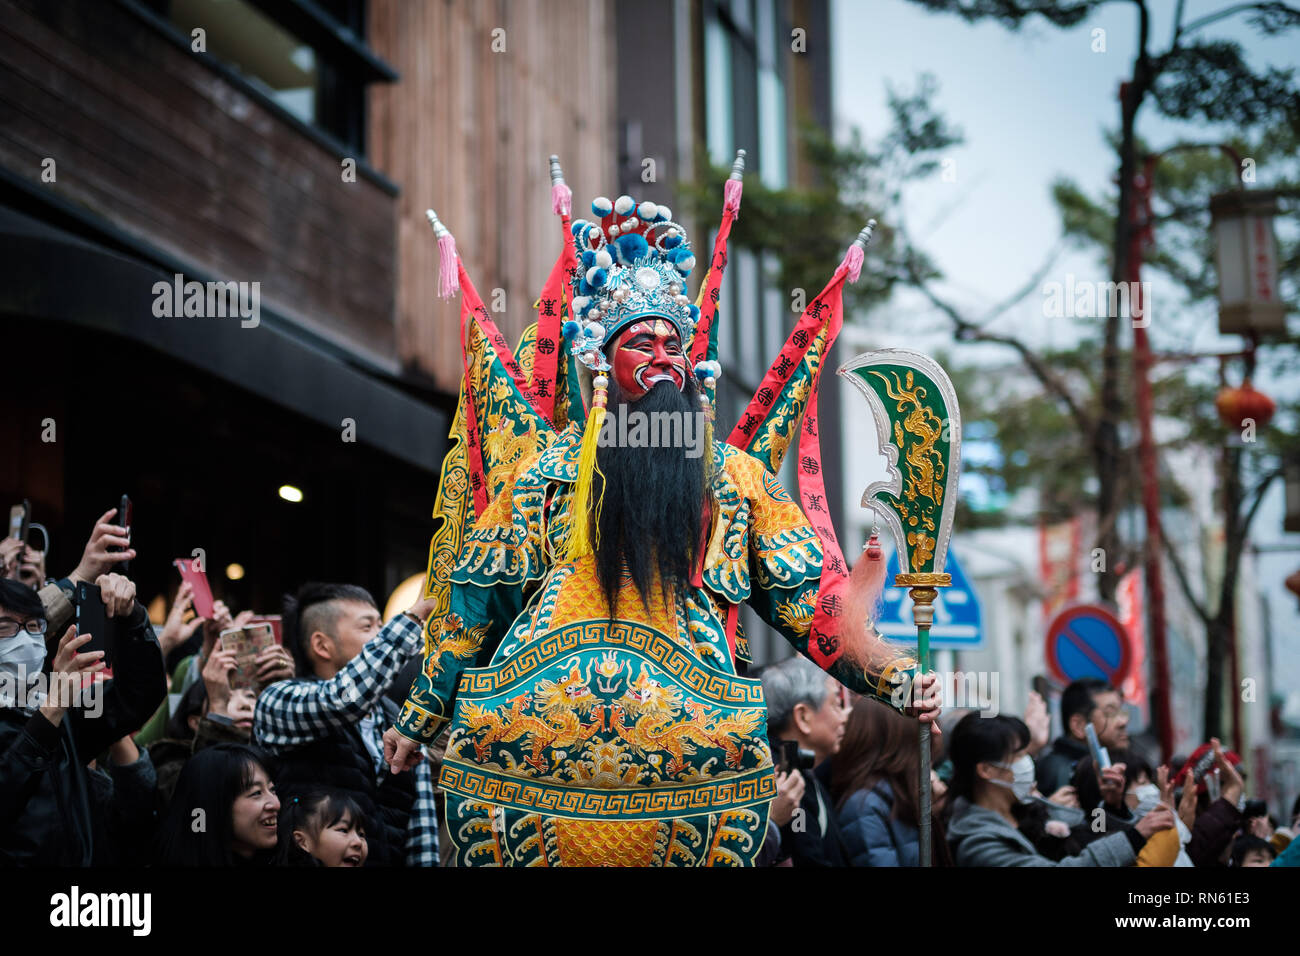 People wearing traditional costume parade in the street of Yokohama's Chinatown on February 16, 2019. Extravagant parade to celebrate the New Year with costumes of the Emperor, ethnic clothing, lion dance, and dragon dance. February 16, 2019 Credit: Nicolas Datiche/AFLO/Alamy Live News Stock Photo